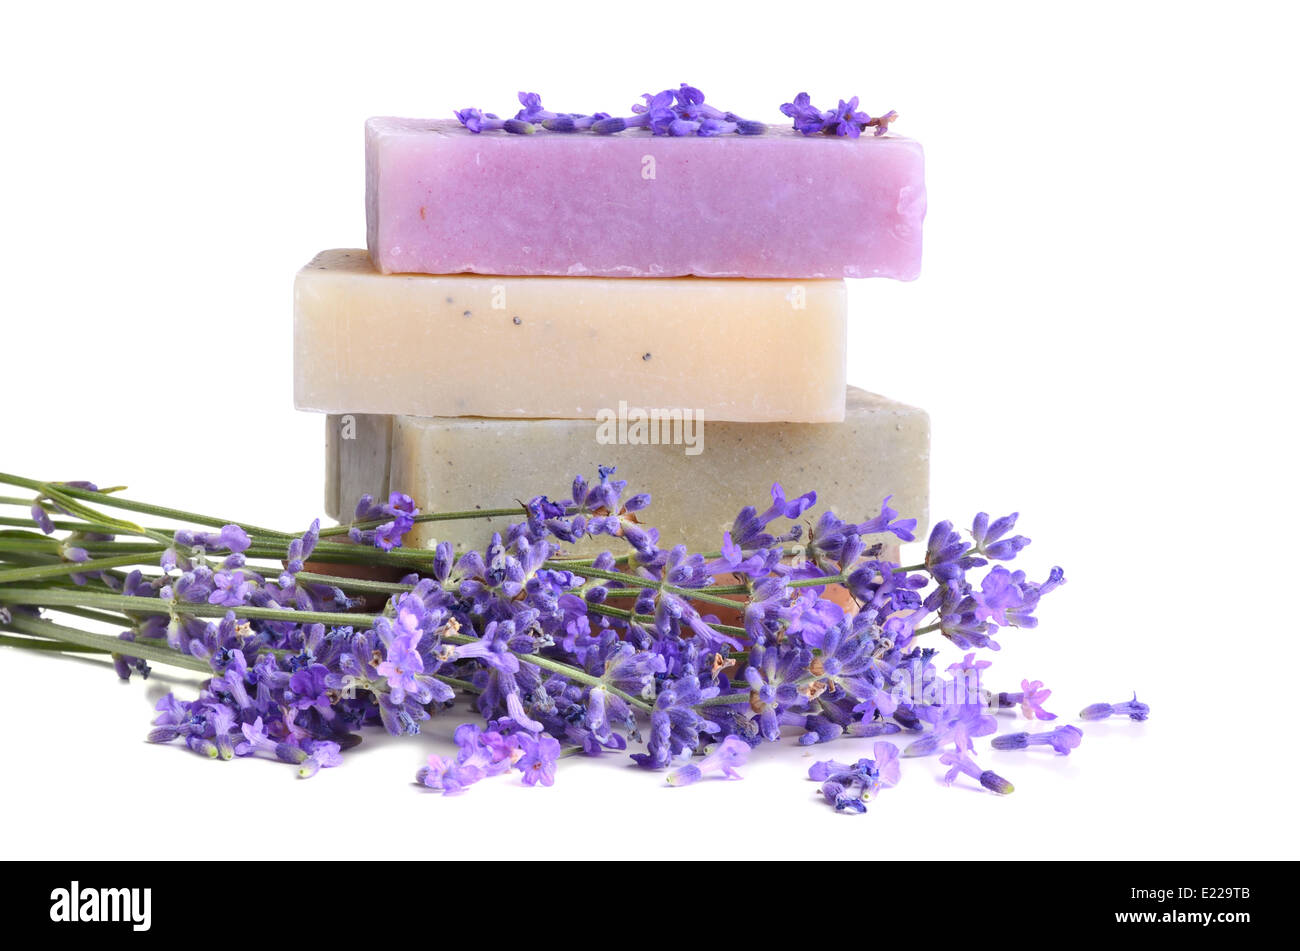 Handmade soaps and lavender Stock Photo